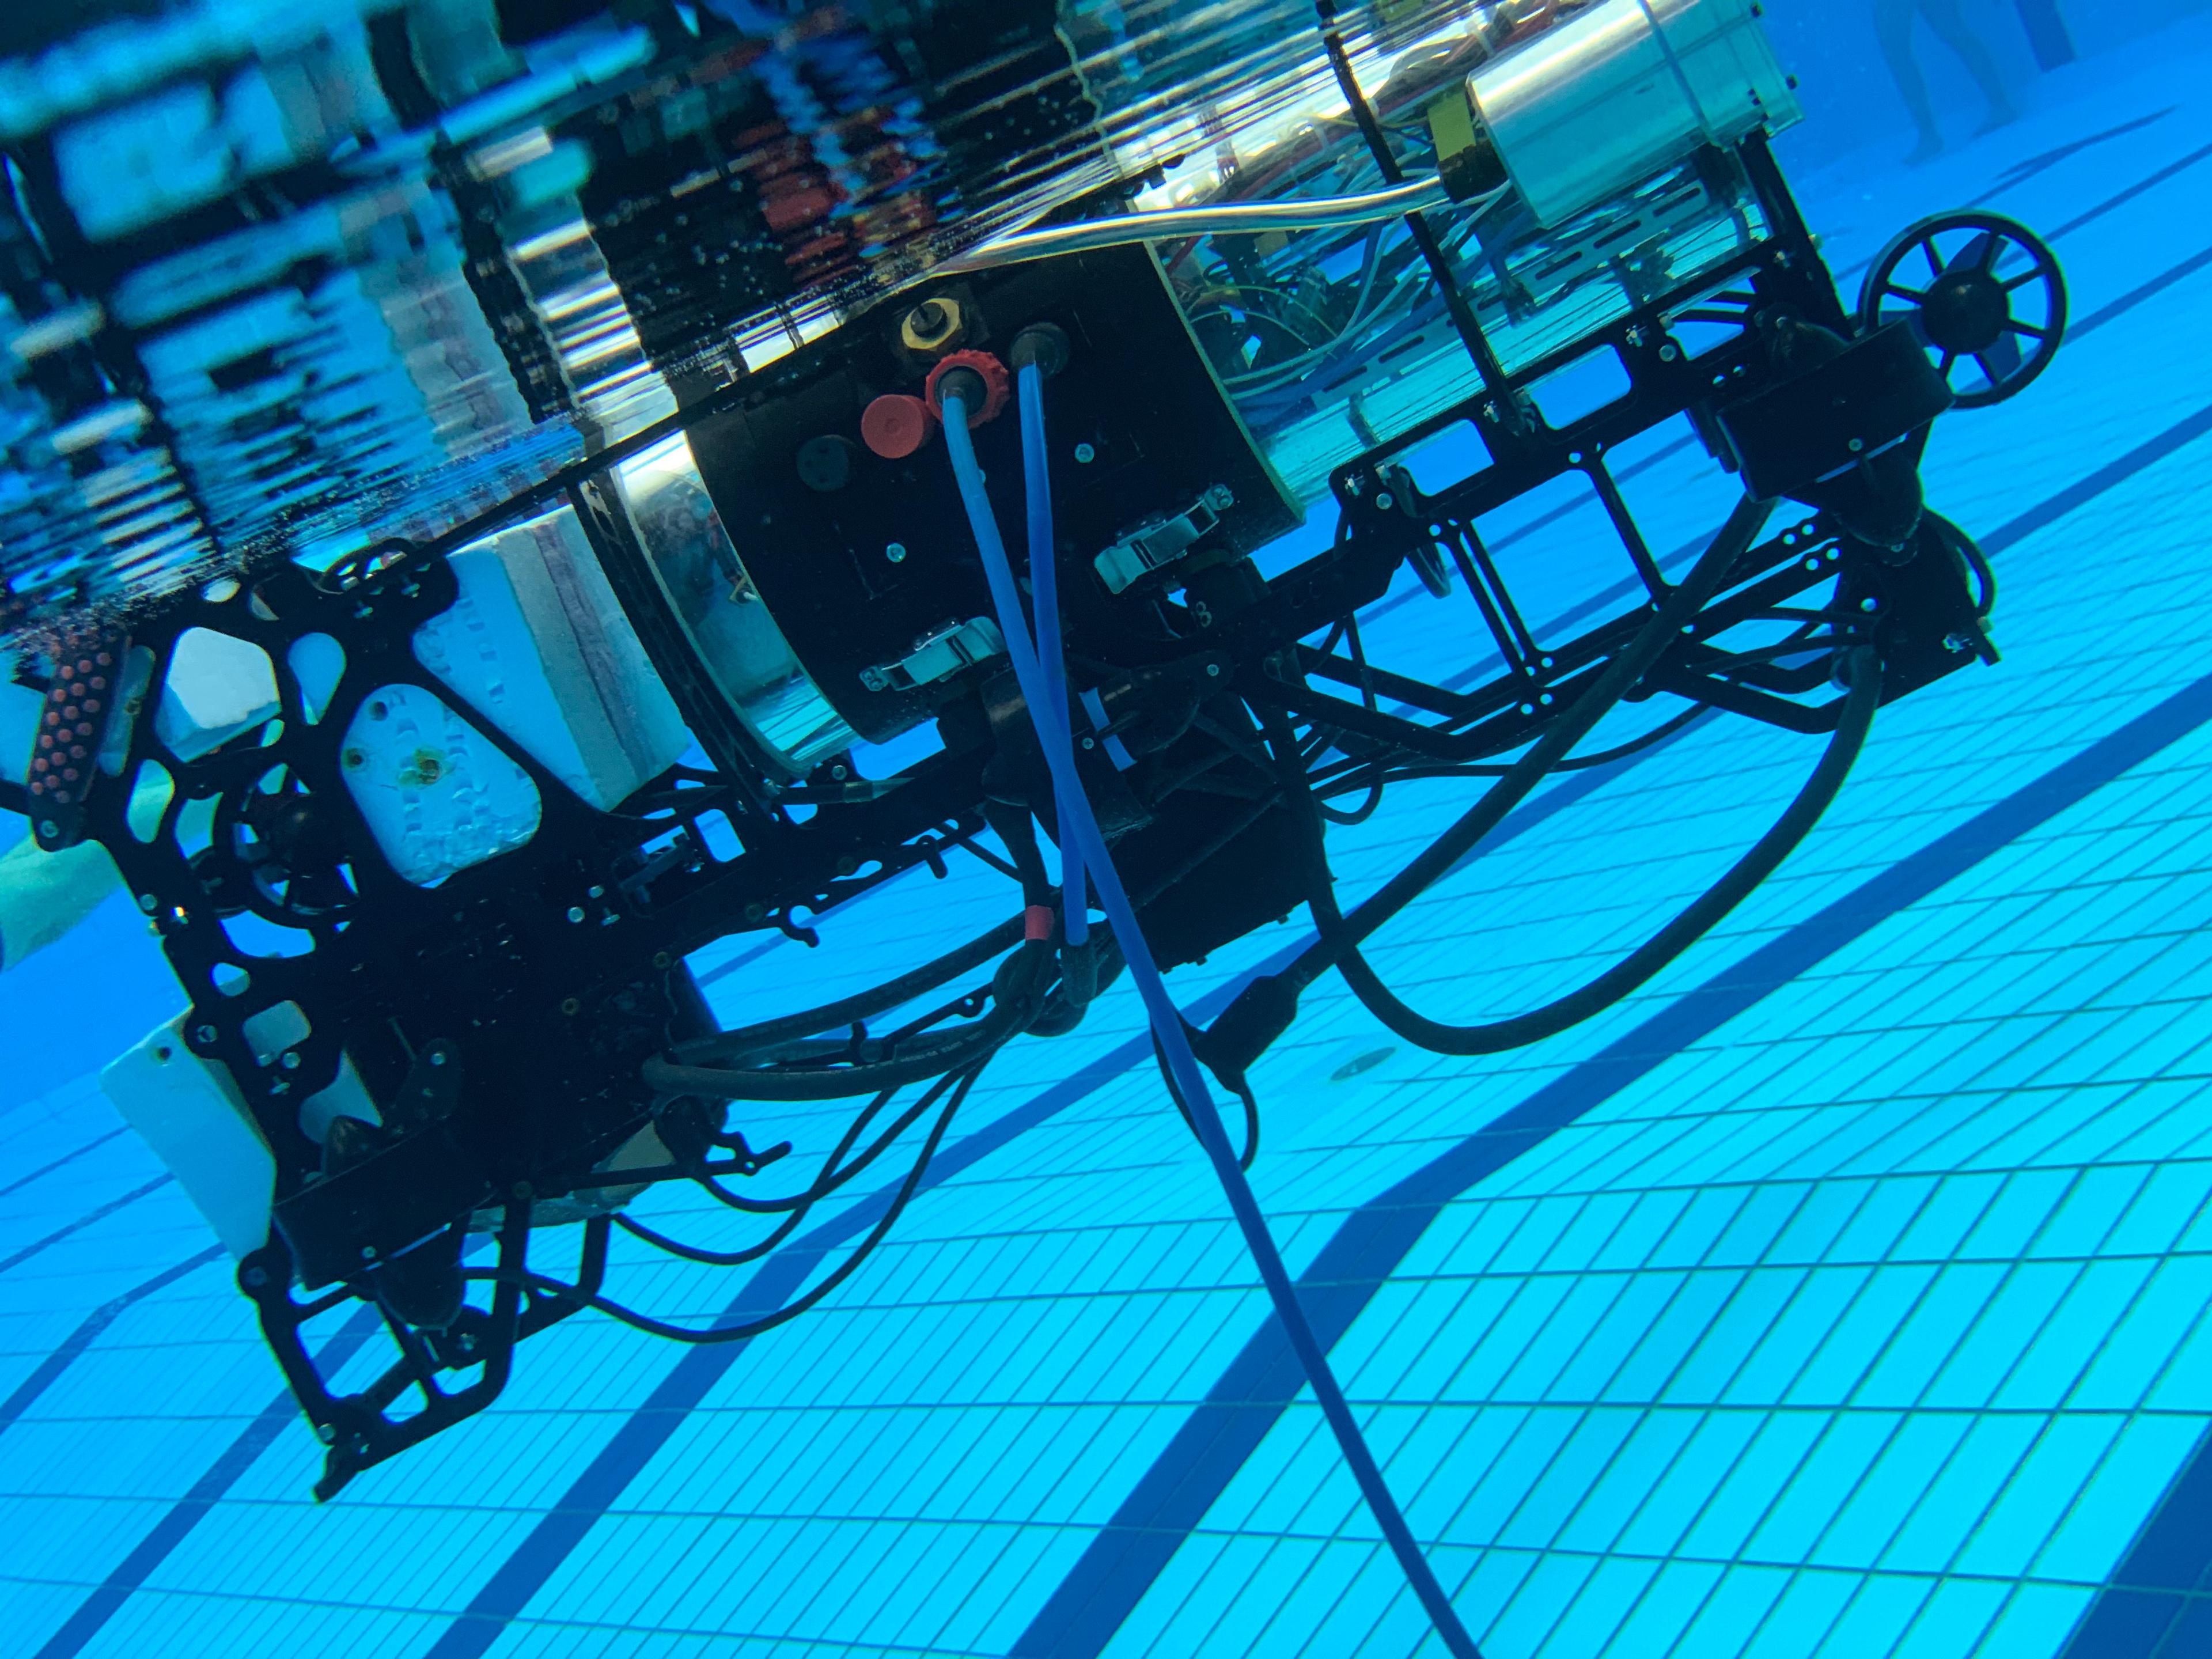 Cover image from AUV @ McGill Robotics